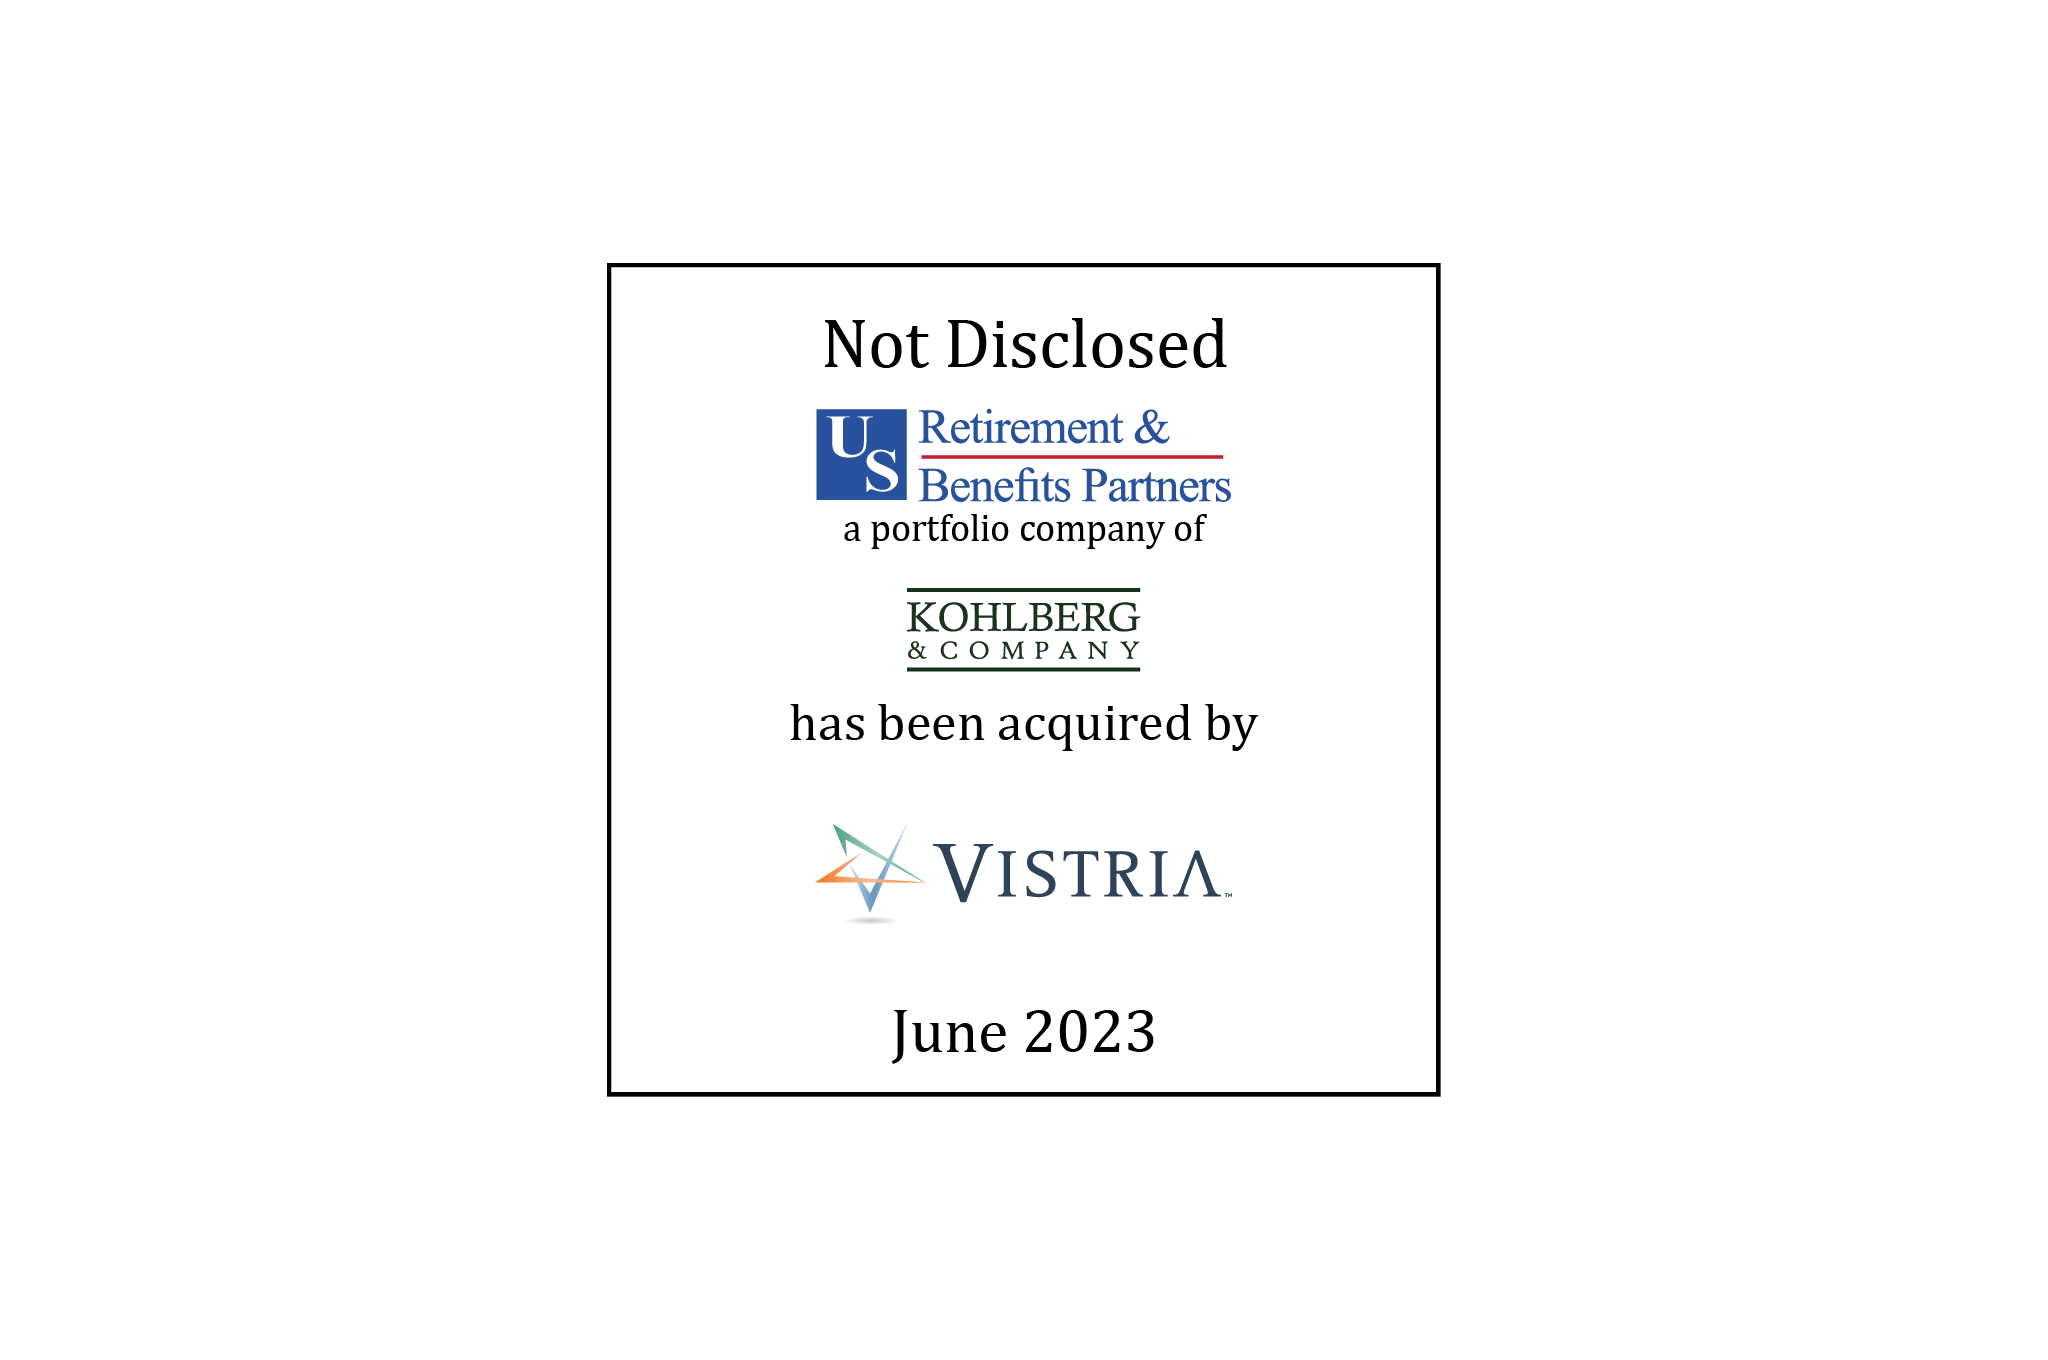 Not Disclosed | U.S. Retirement and Benefits Partners (logo), a portfolio company of Kohlberg & Company, has been acquired by Vistria Group (logo) | June 2023